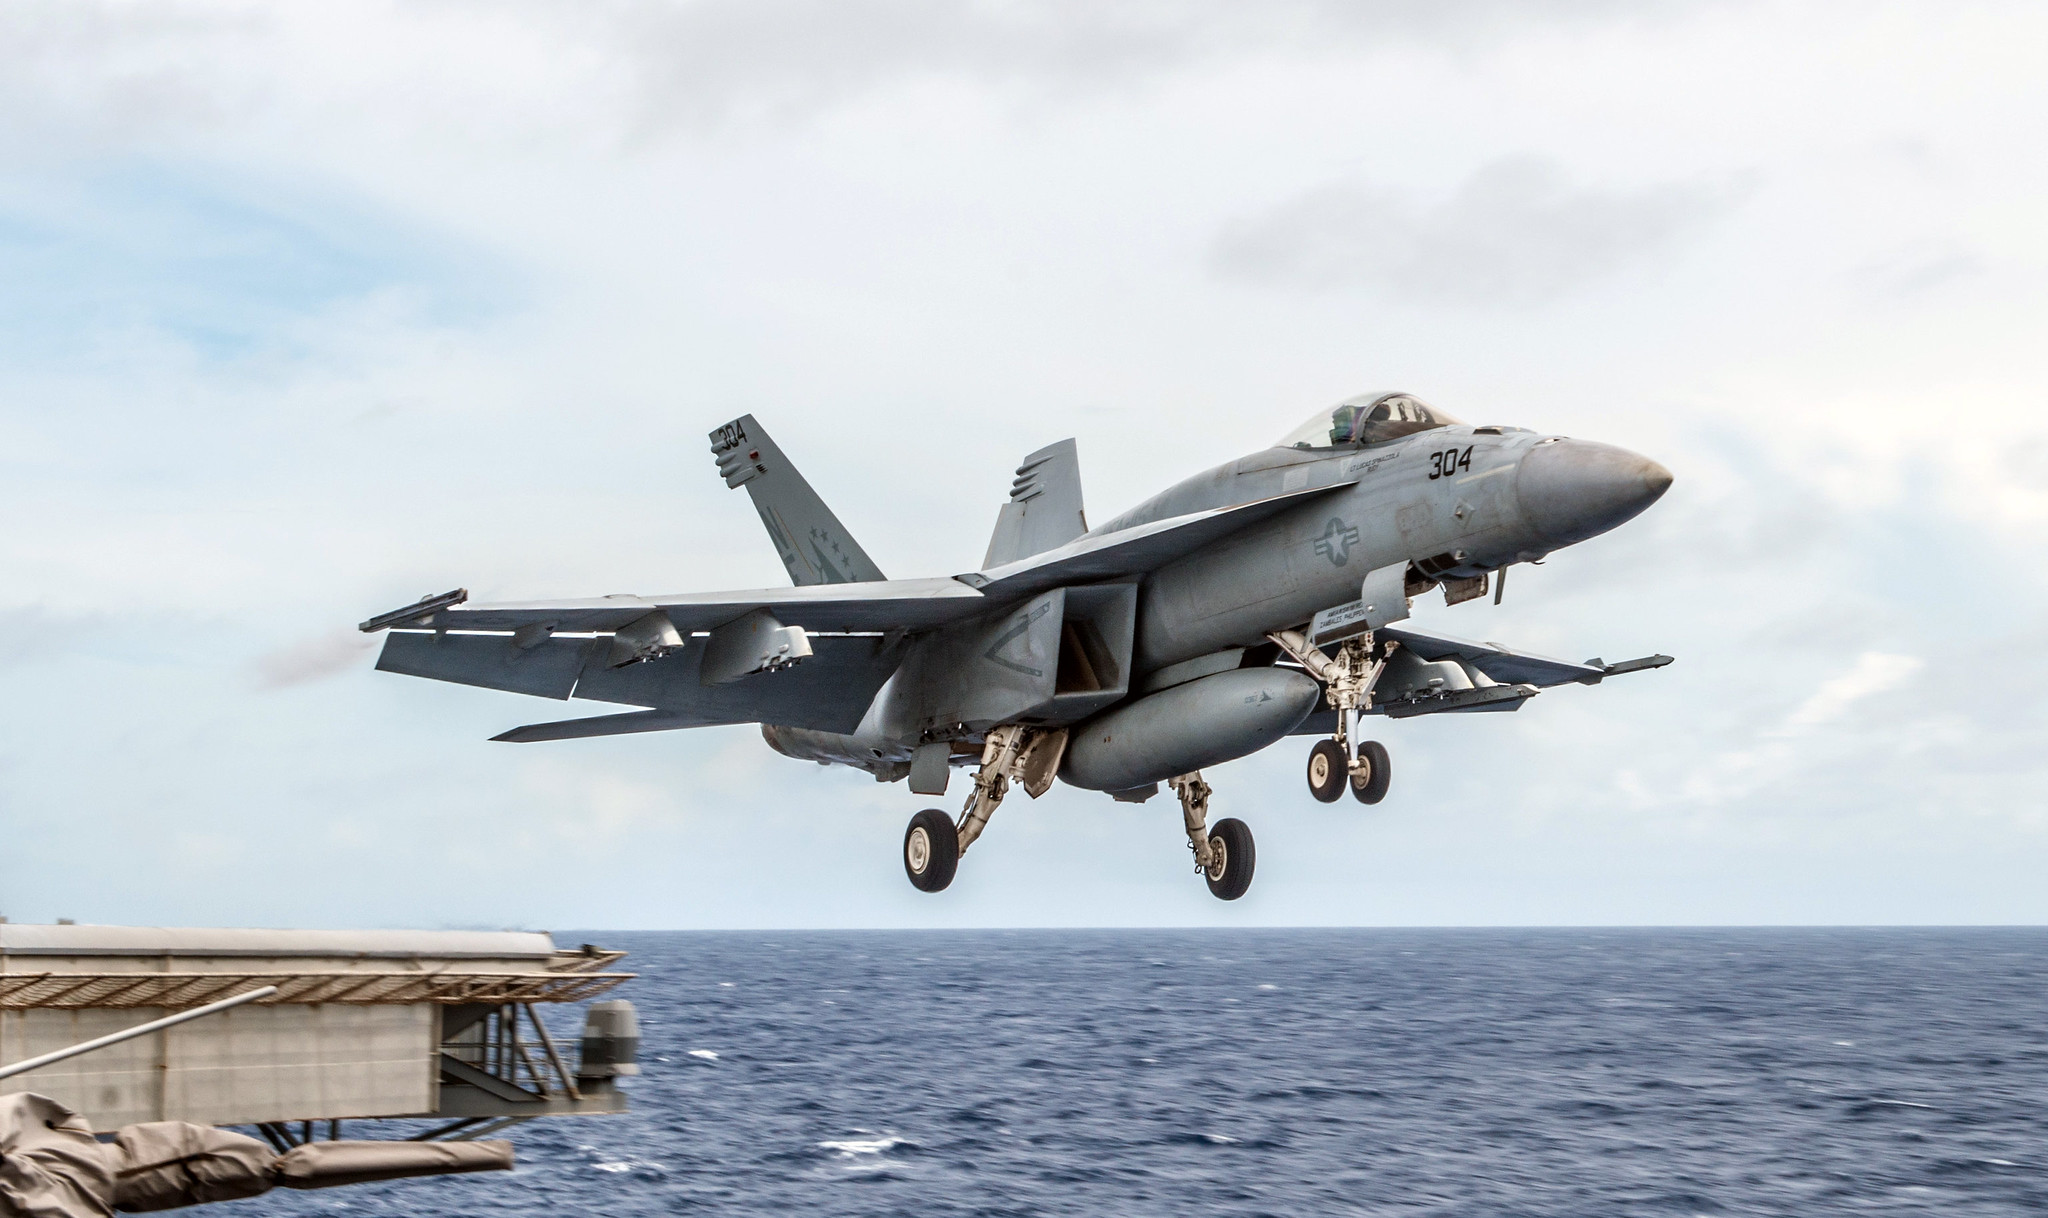 Navy pilot ejects safely as F/A-18E Super Hornet crashes in California